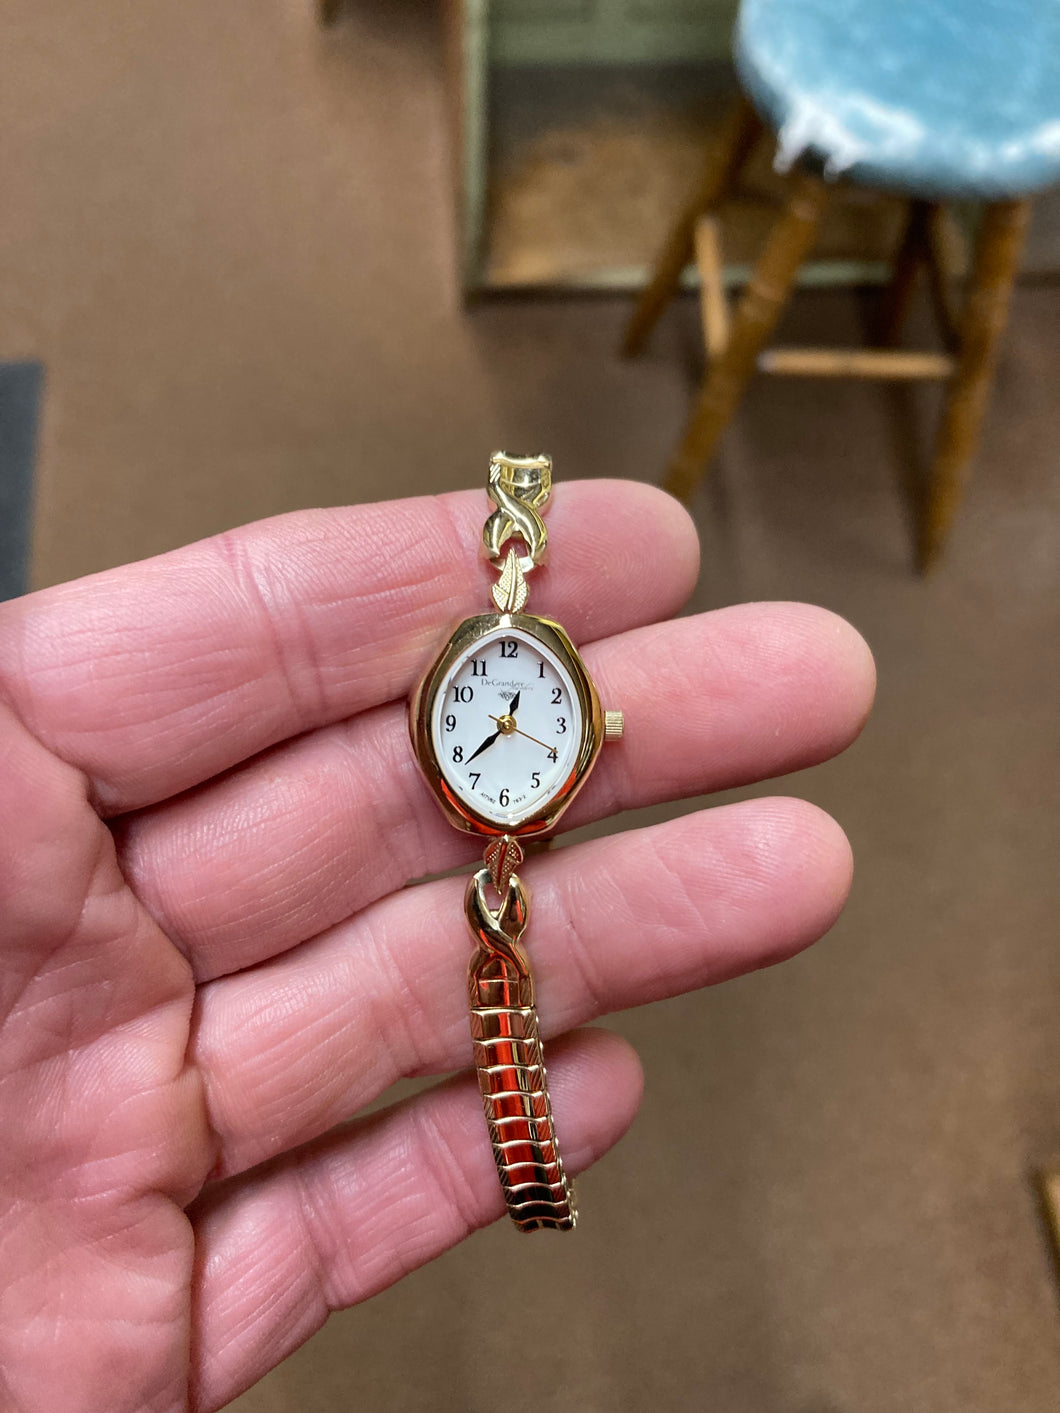 DeGrandpre Jewelers Women's Gold Tone Expansion Watch